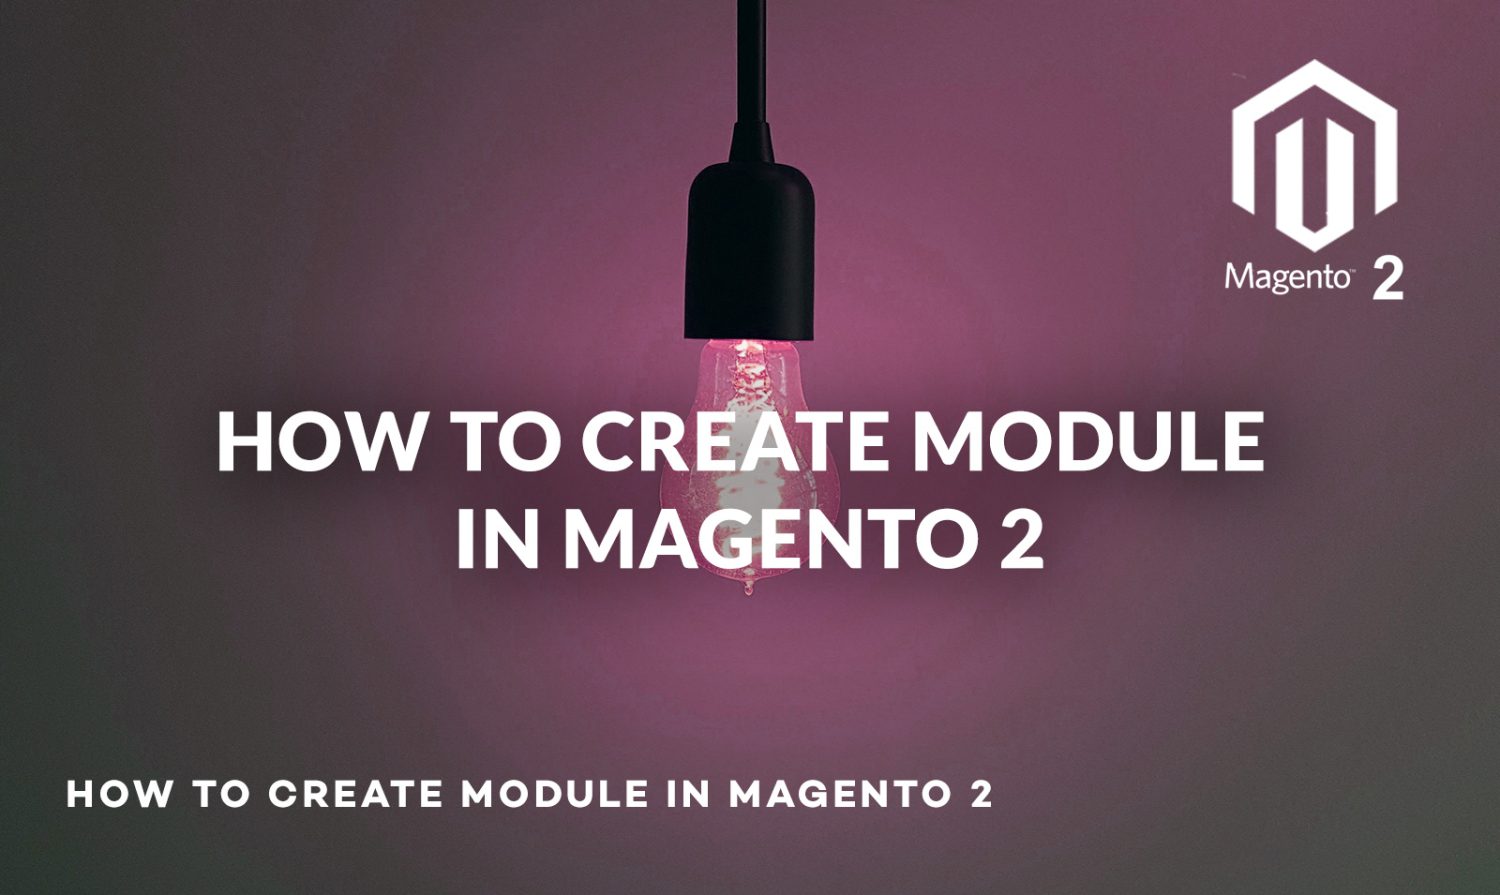 How to create module in Magento 2?